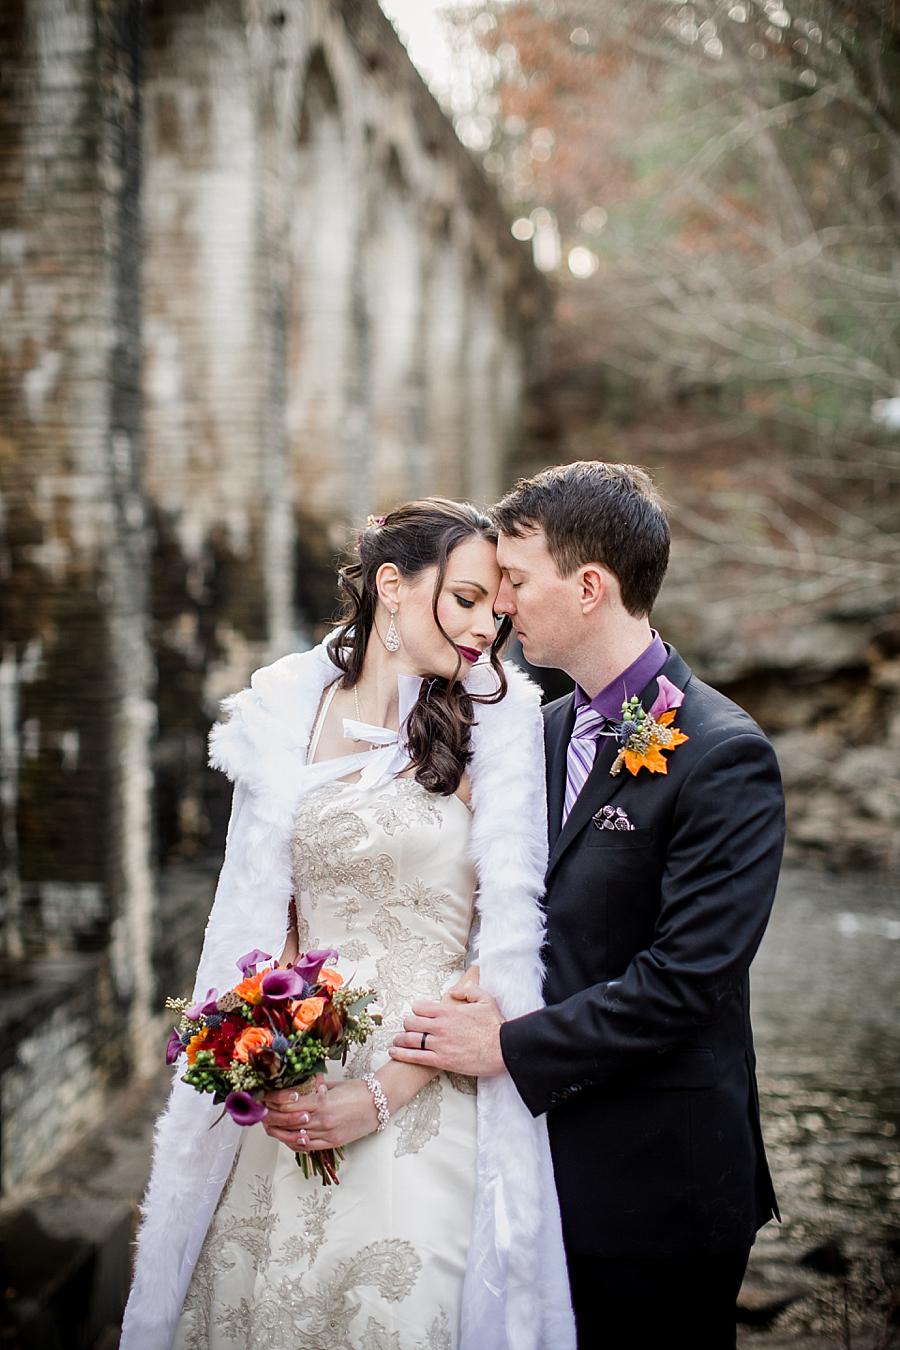 Foreheads together at this Cumberland Mountain State Park wedding by Knoxville Wedding Photographer, Amanda May Photos.